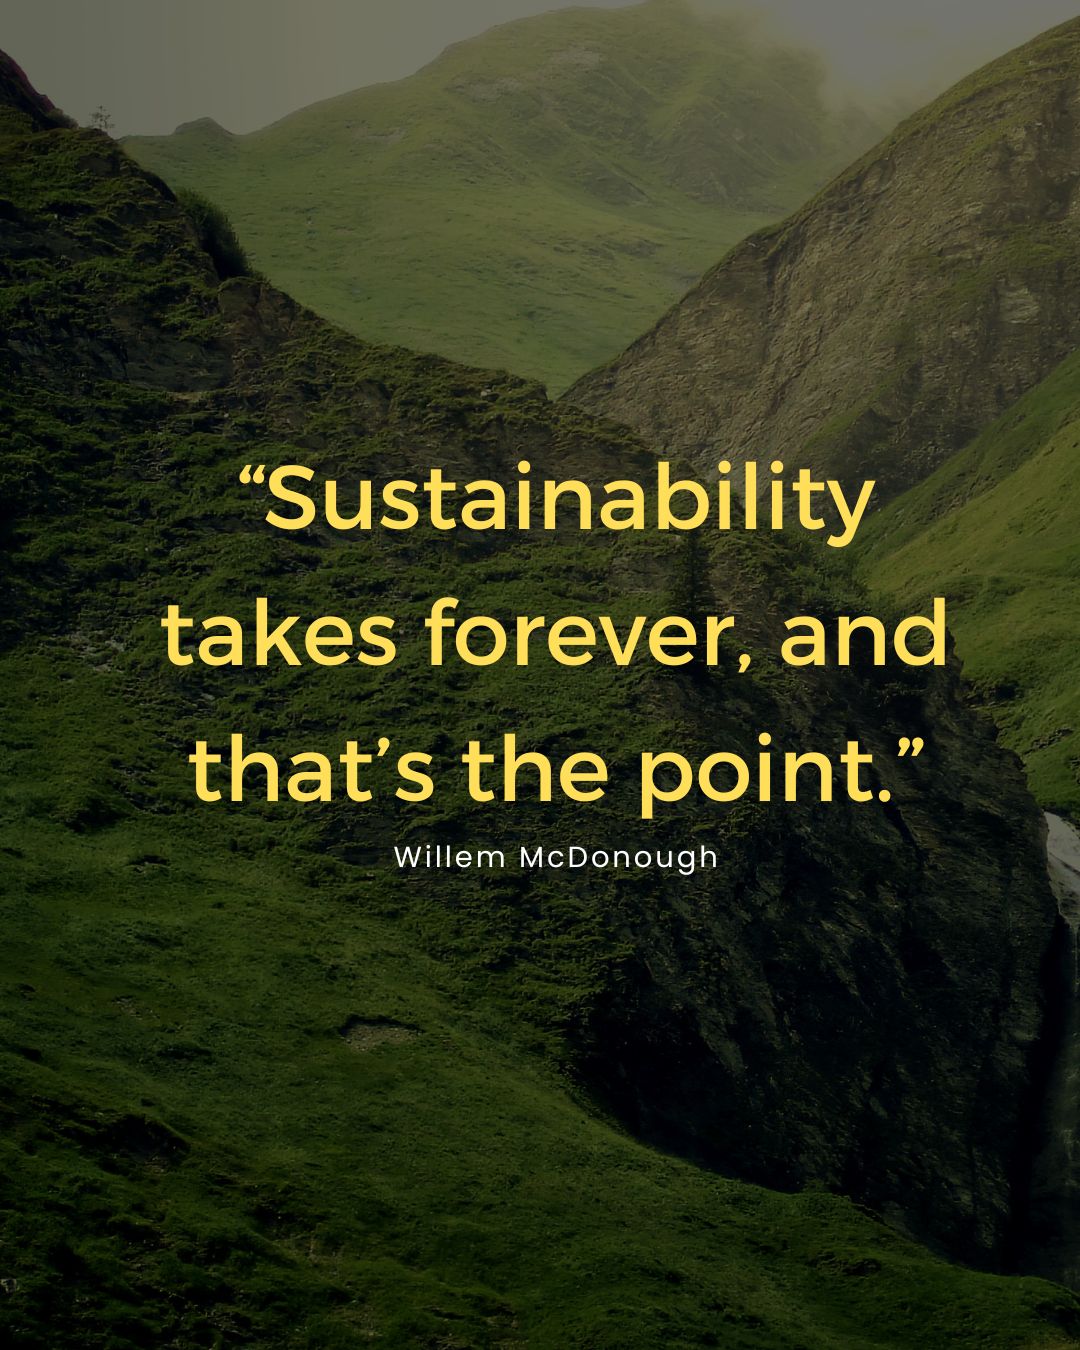 Sustainability takes forever, and that’s the point